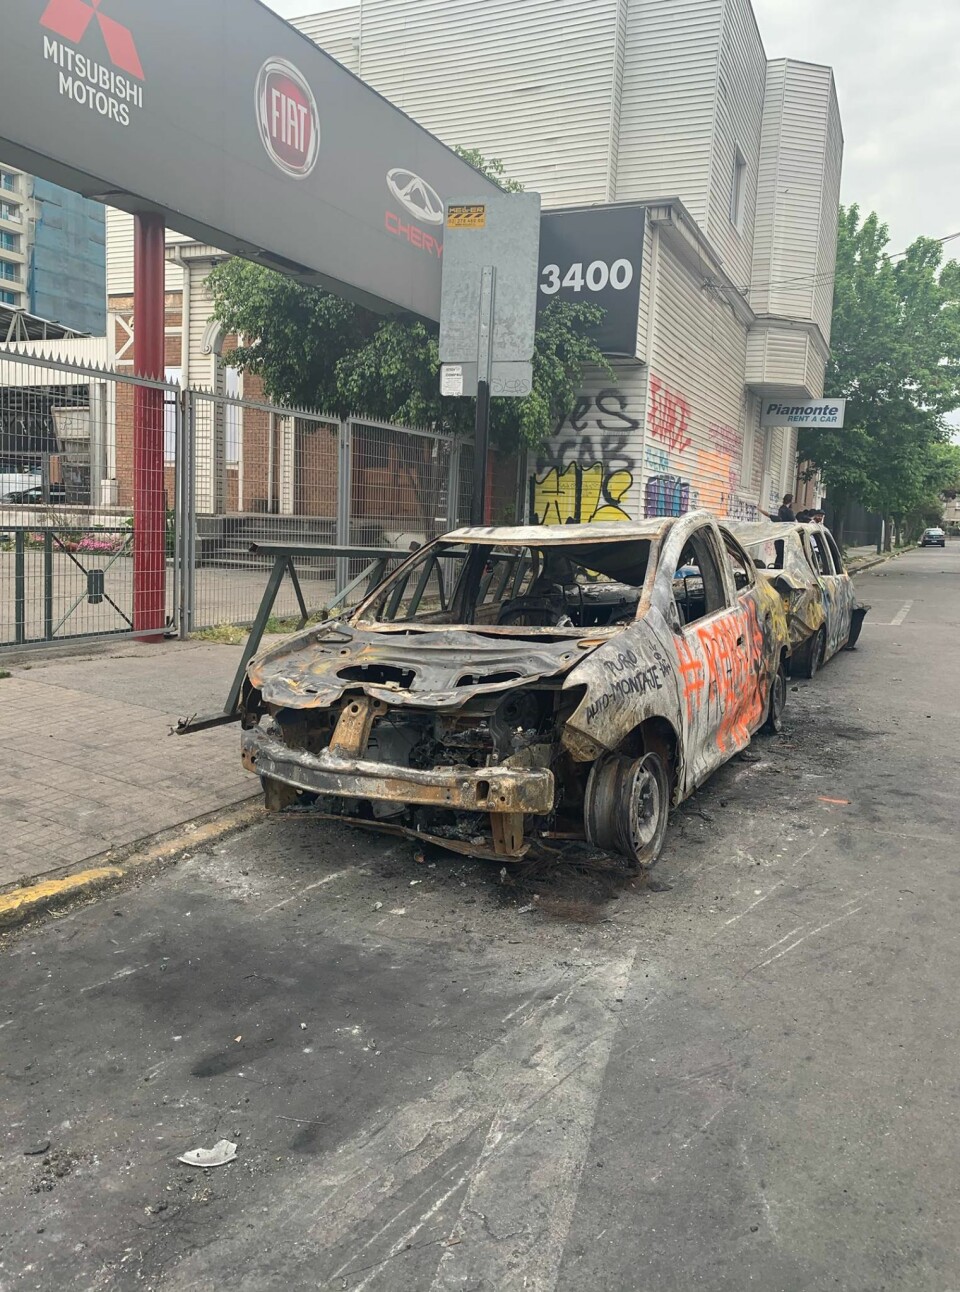 VANDALISM: The protesters put fire to several buses and cars during the riots